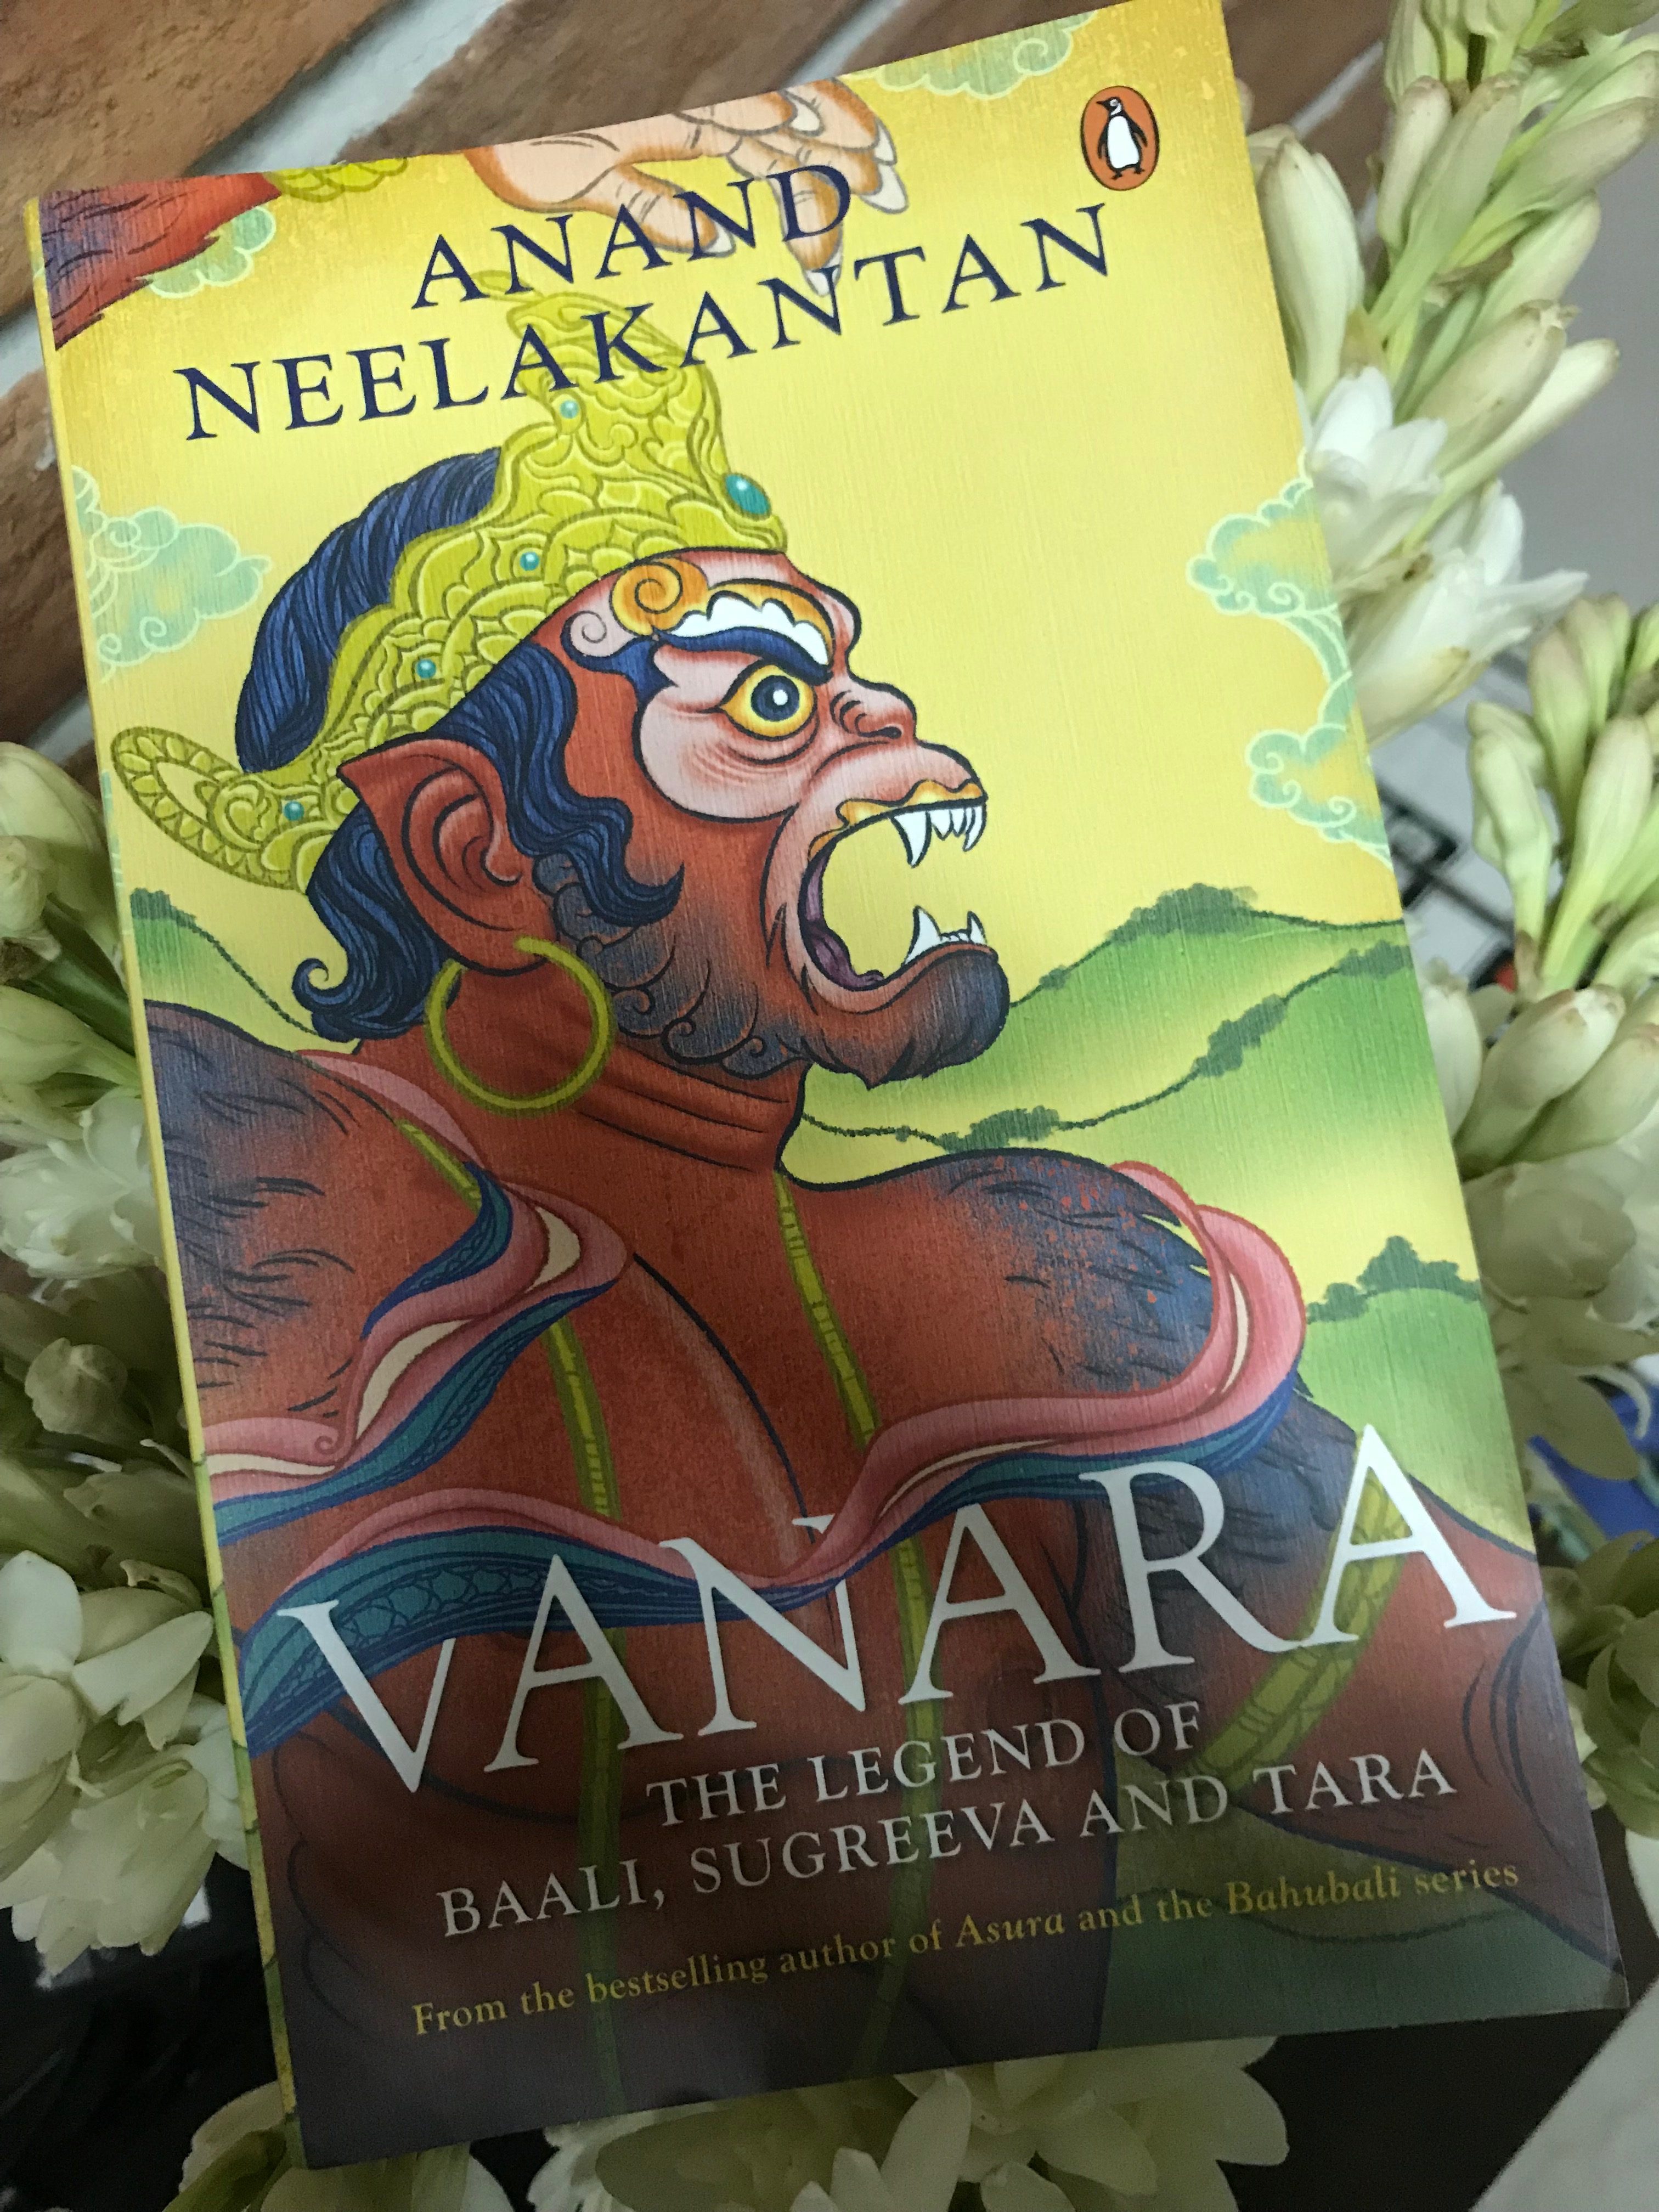 Read more about the article Anand Neelakanthan’s Vanara- an immersive saga about the legend of Sugreeva, Baali and Tara